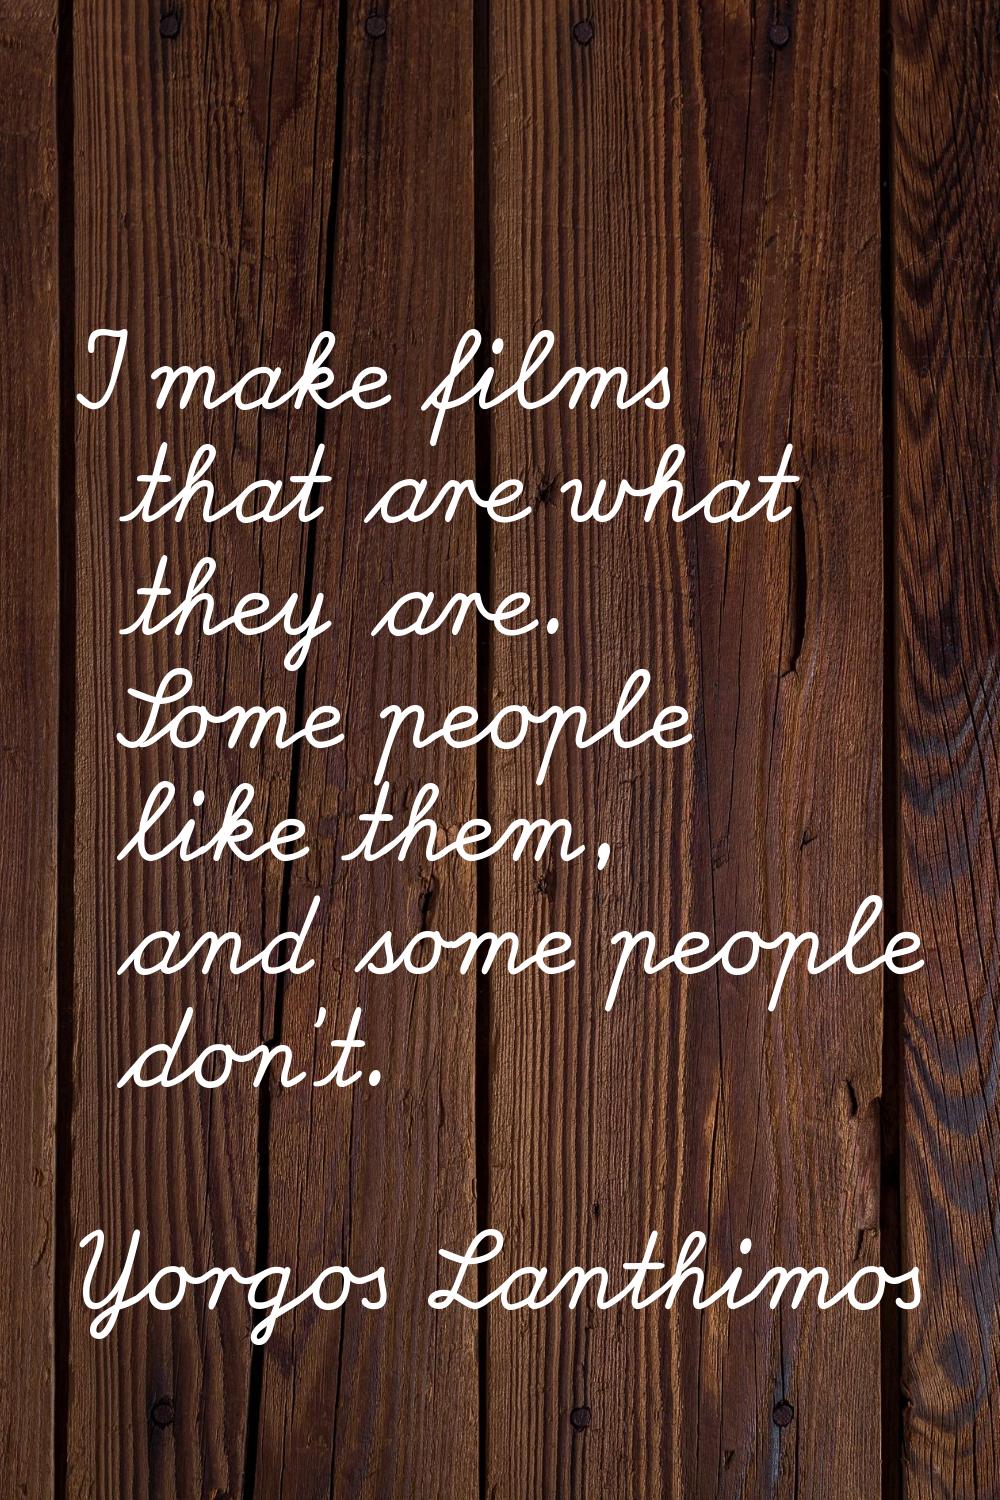 I make films that are what they are. Some people like them, and some people don't.